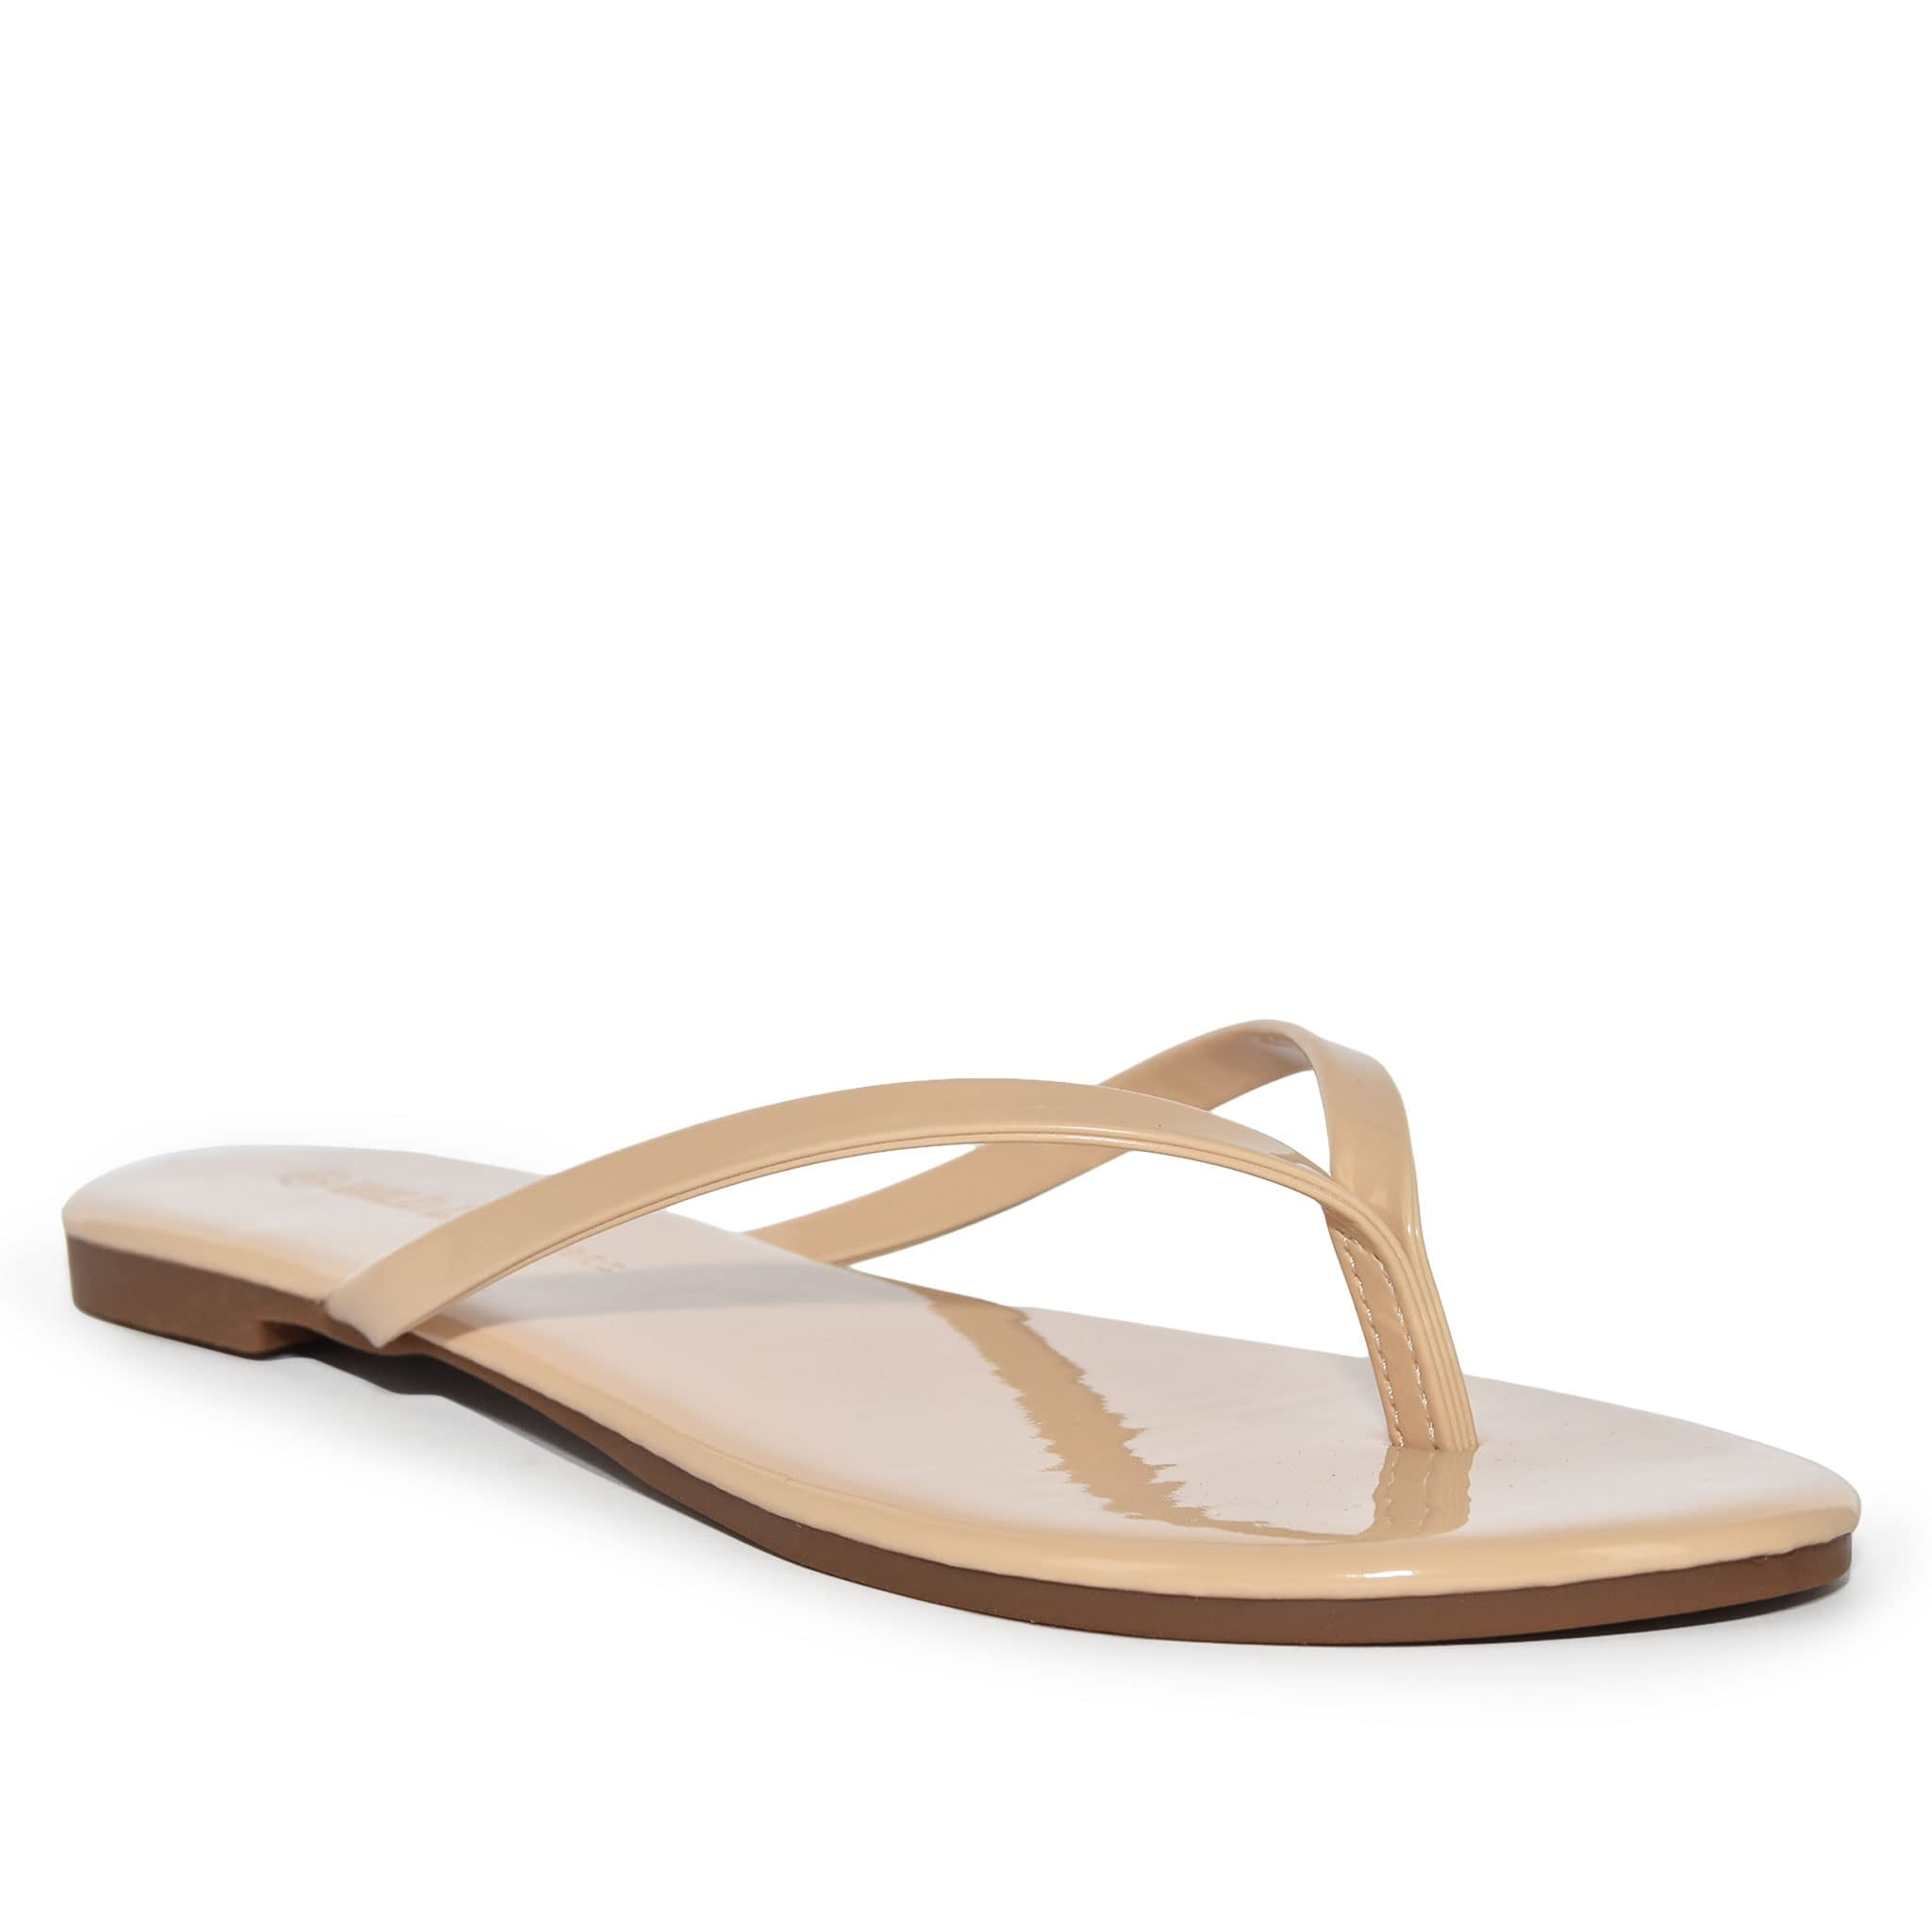 Wild Diva Classic Faux Patent Leather Almond Toe Flip Flop Thong Sandals  (Nude, 7.5) 